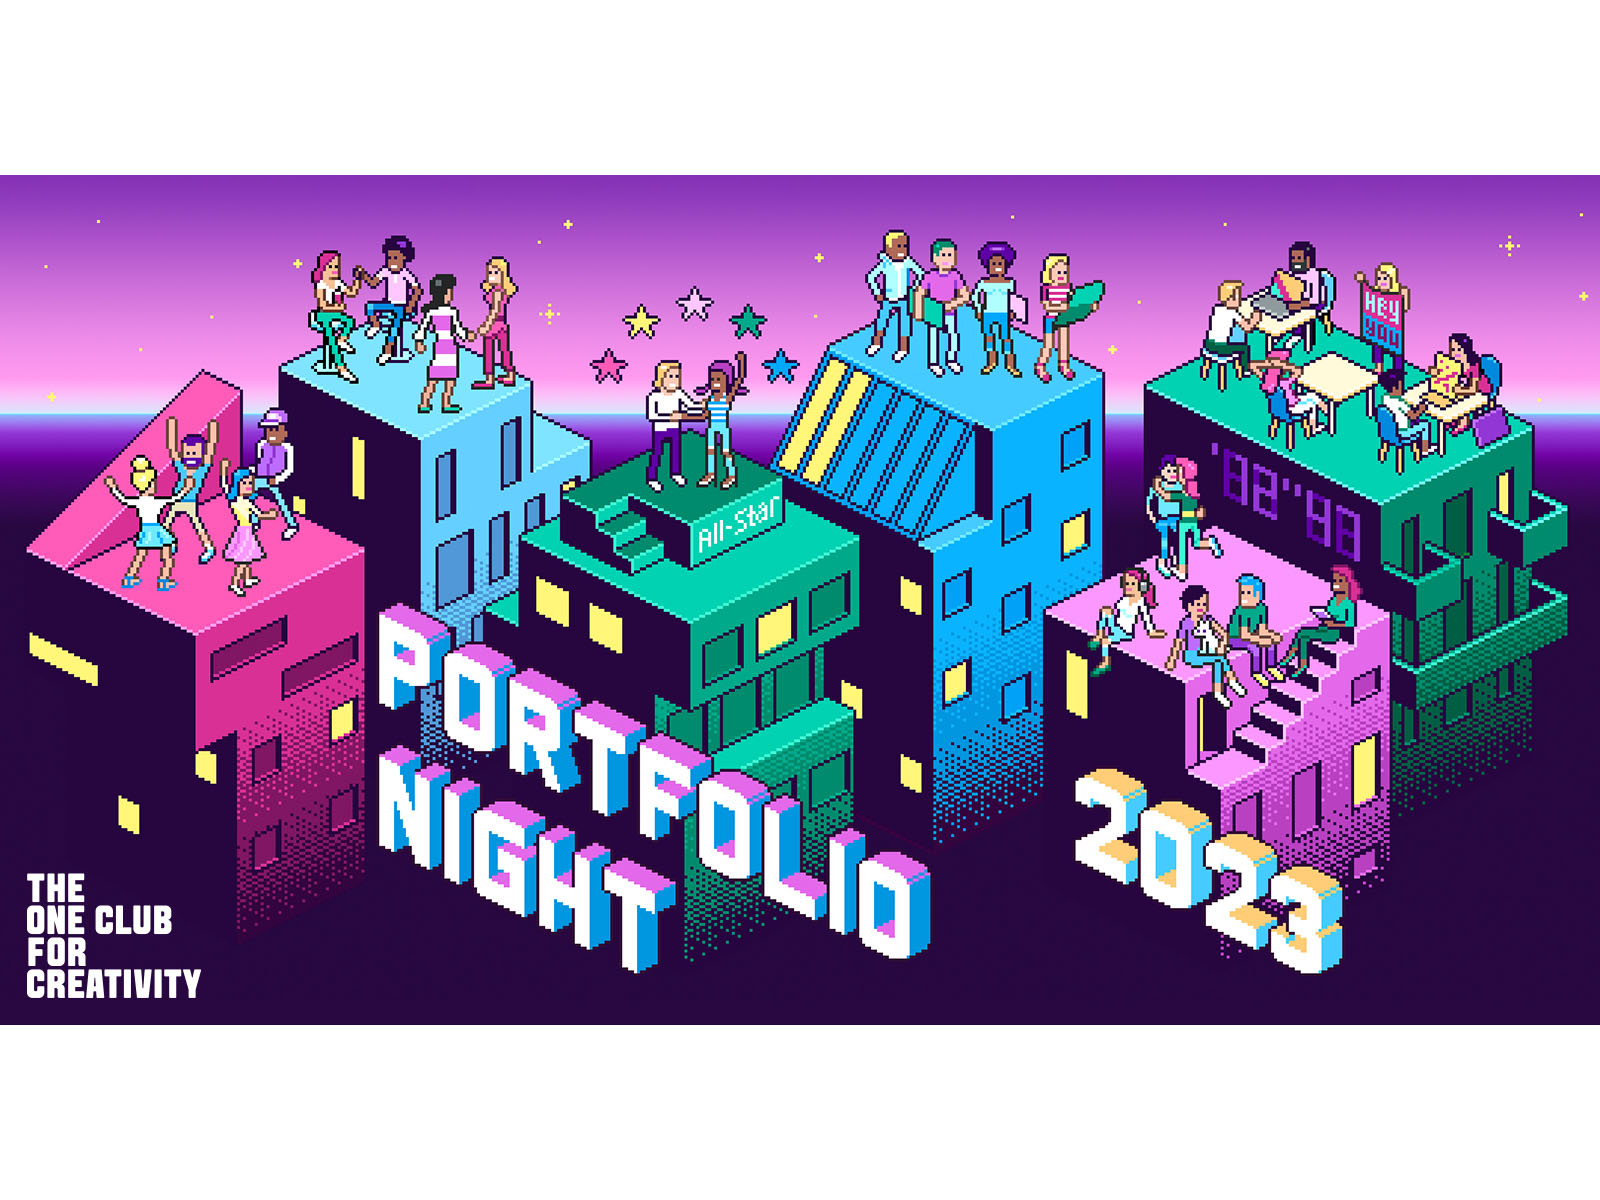 Portfolio Night 2023 to take place in 25 cities including Riyadh for the first time